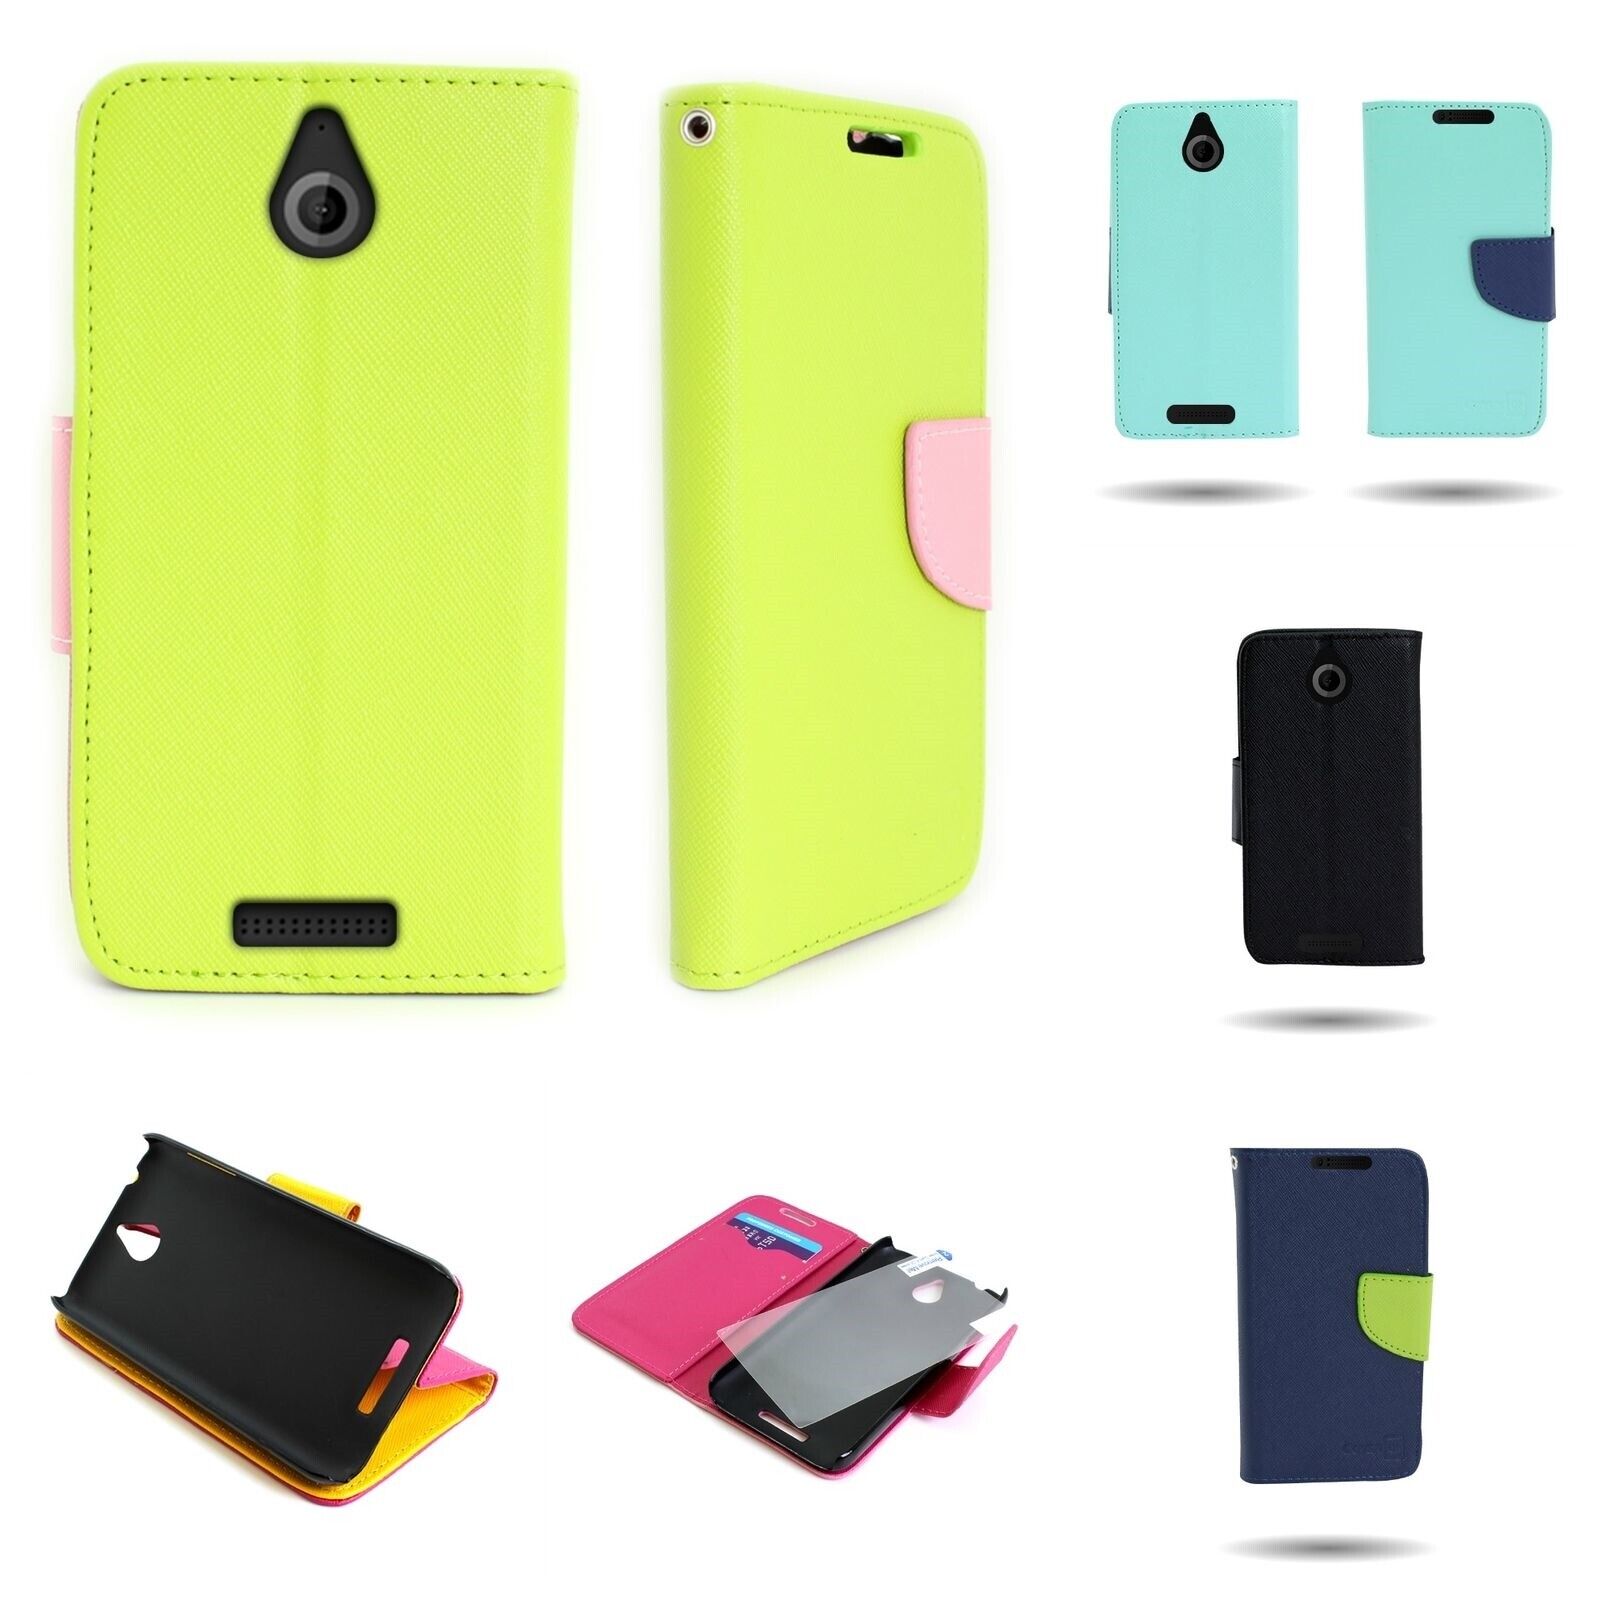 For HTC Desire 510 Case Flip Cover Wallet Pouch Accessory Phone + LCD Protector CoverON VAR-HT510-CO-VW1